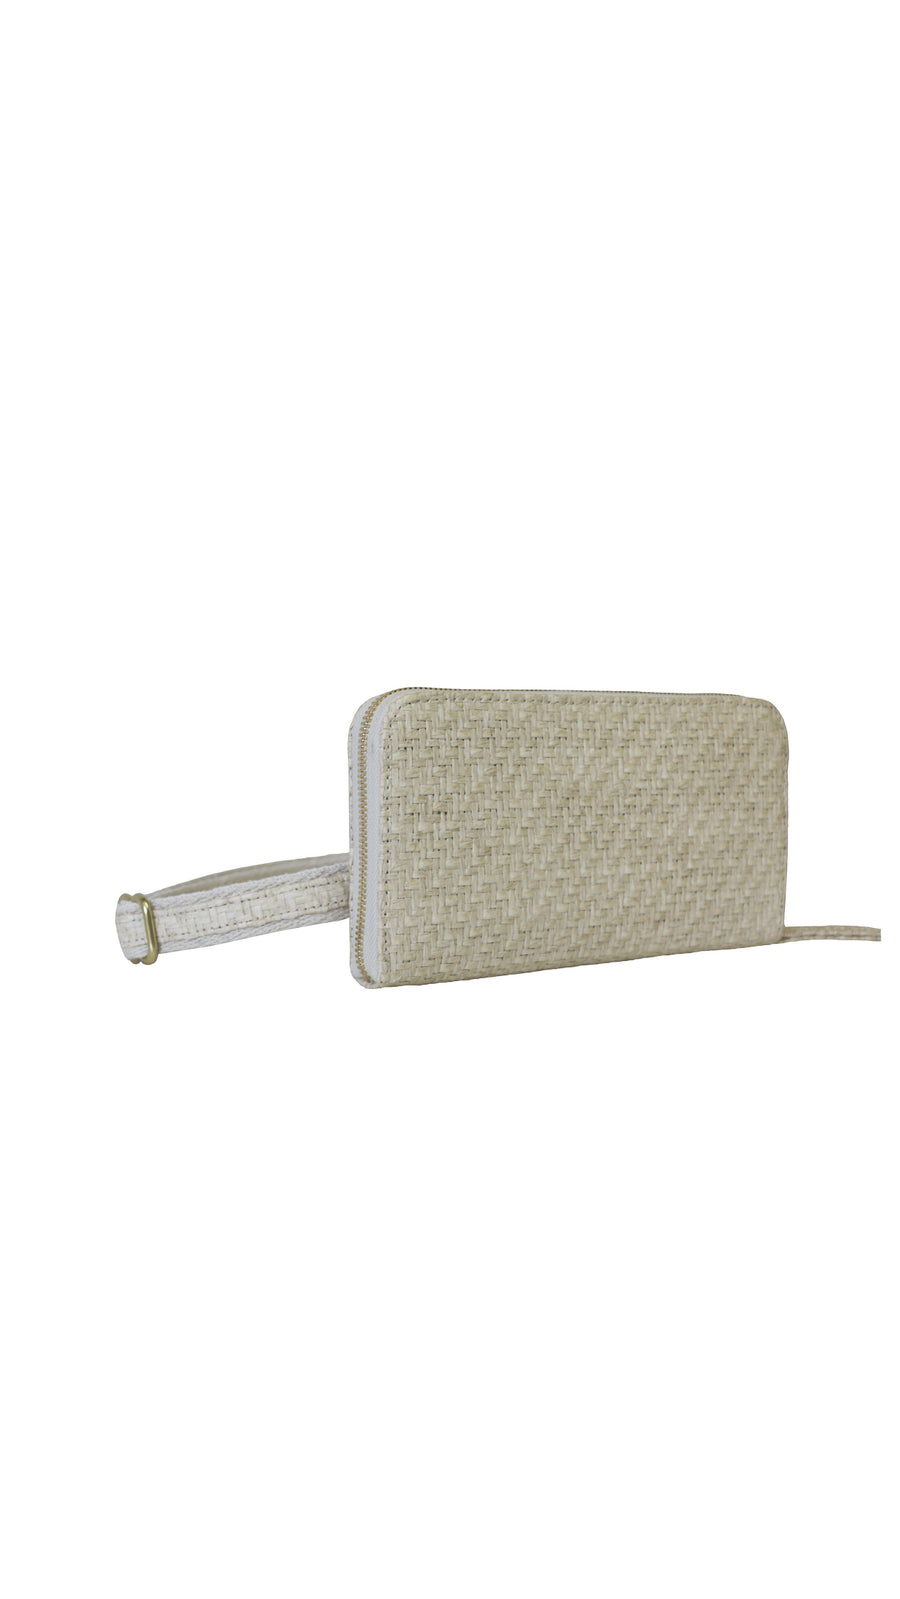 Raffia White Sand Convertible Wallet by HFS Collective